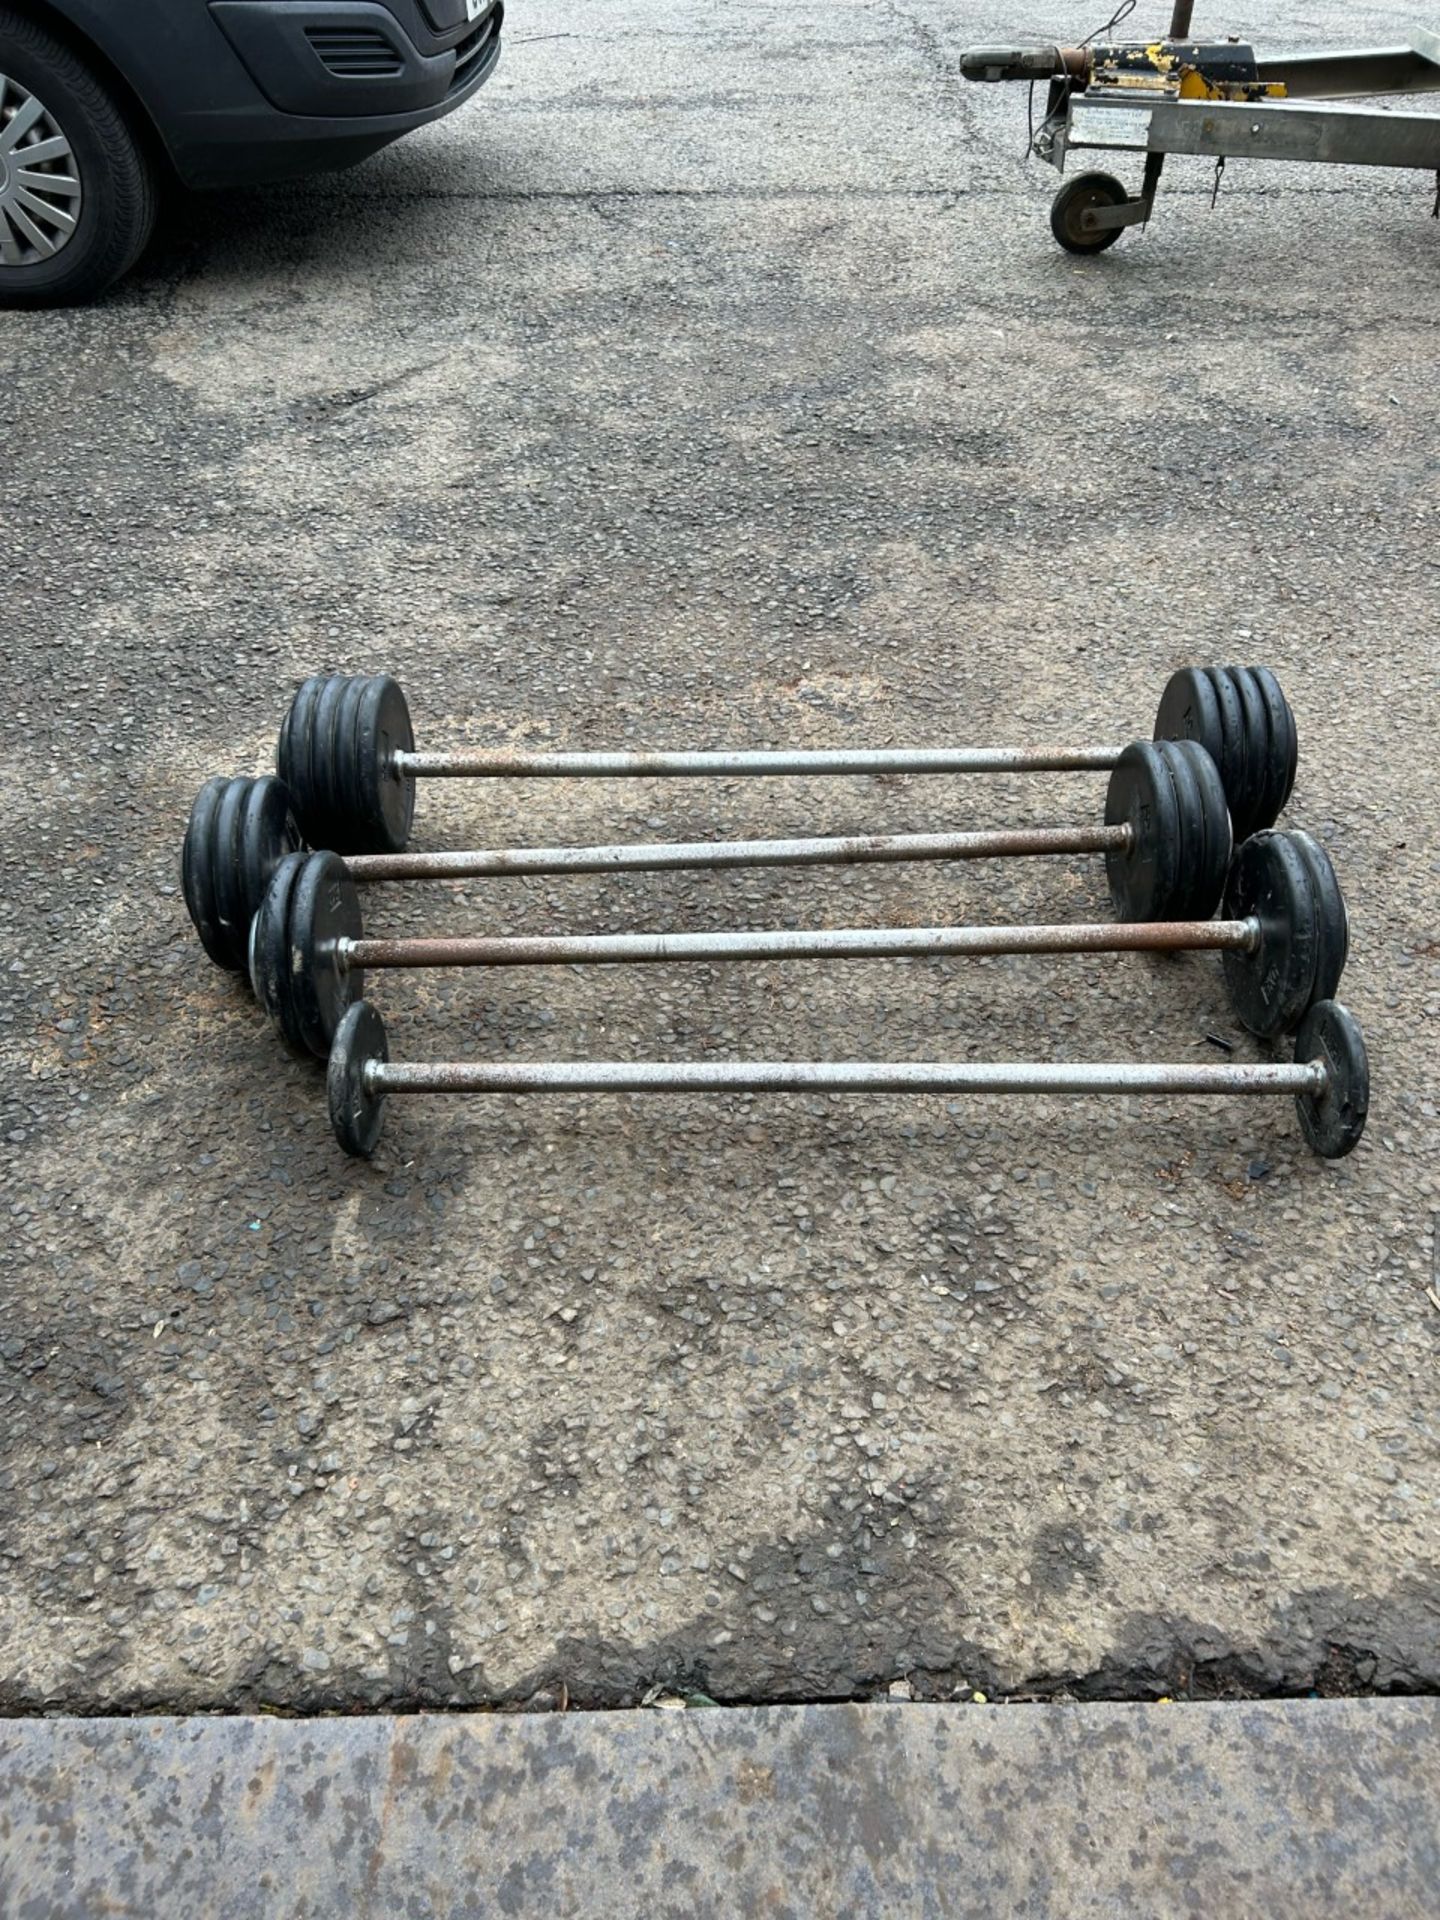 4x fixed rubber barbell weights. Average condition 10kg, 30kg, 40kg and 50kg